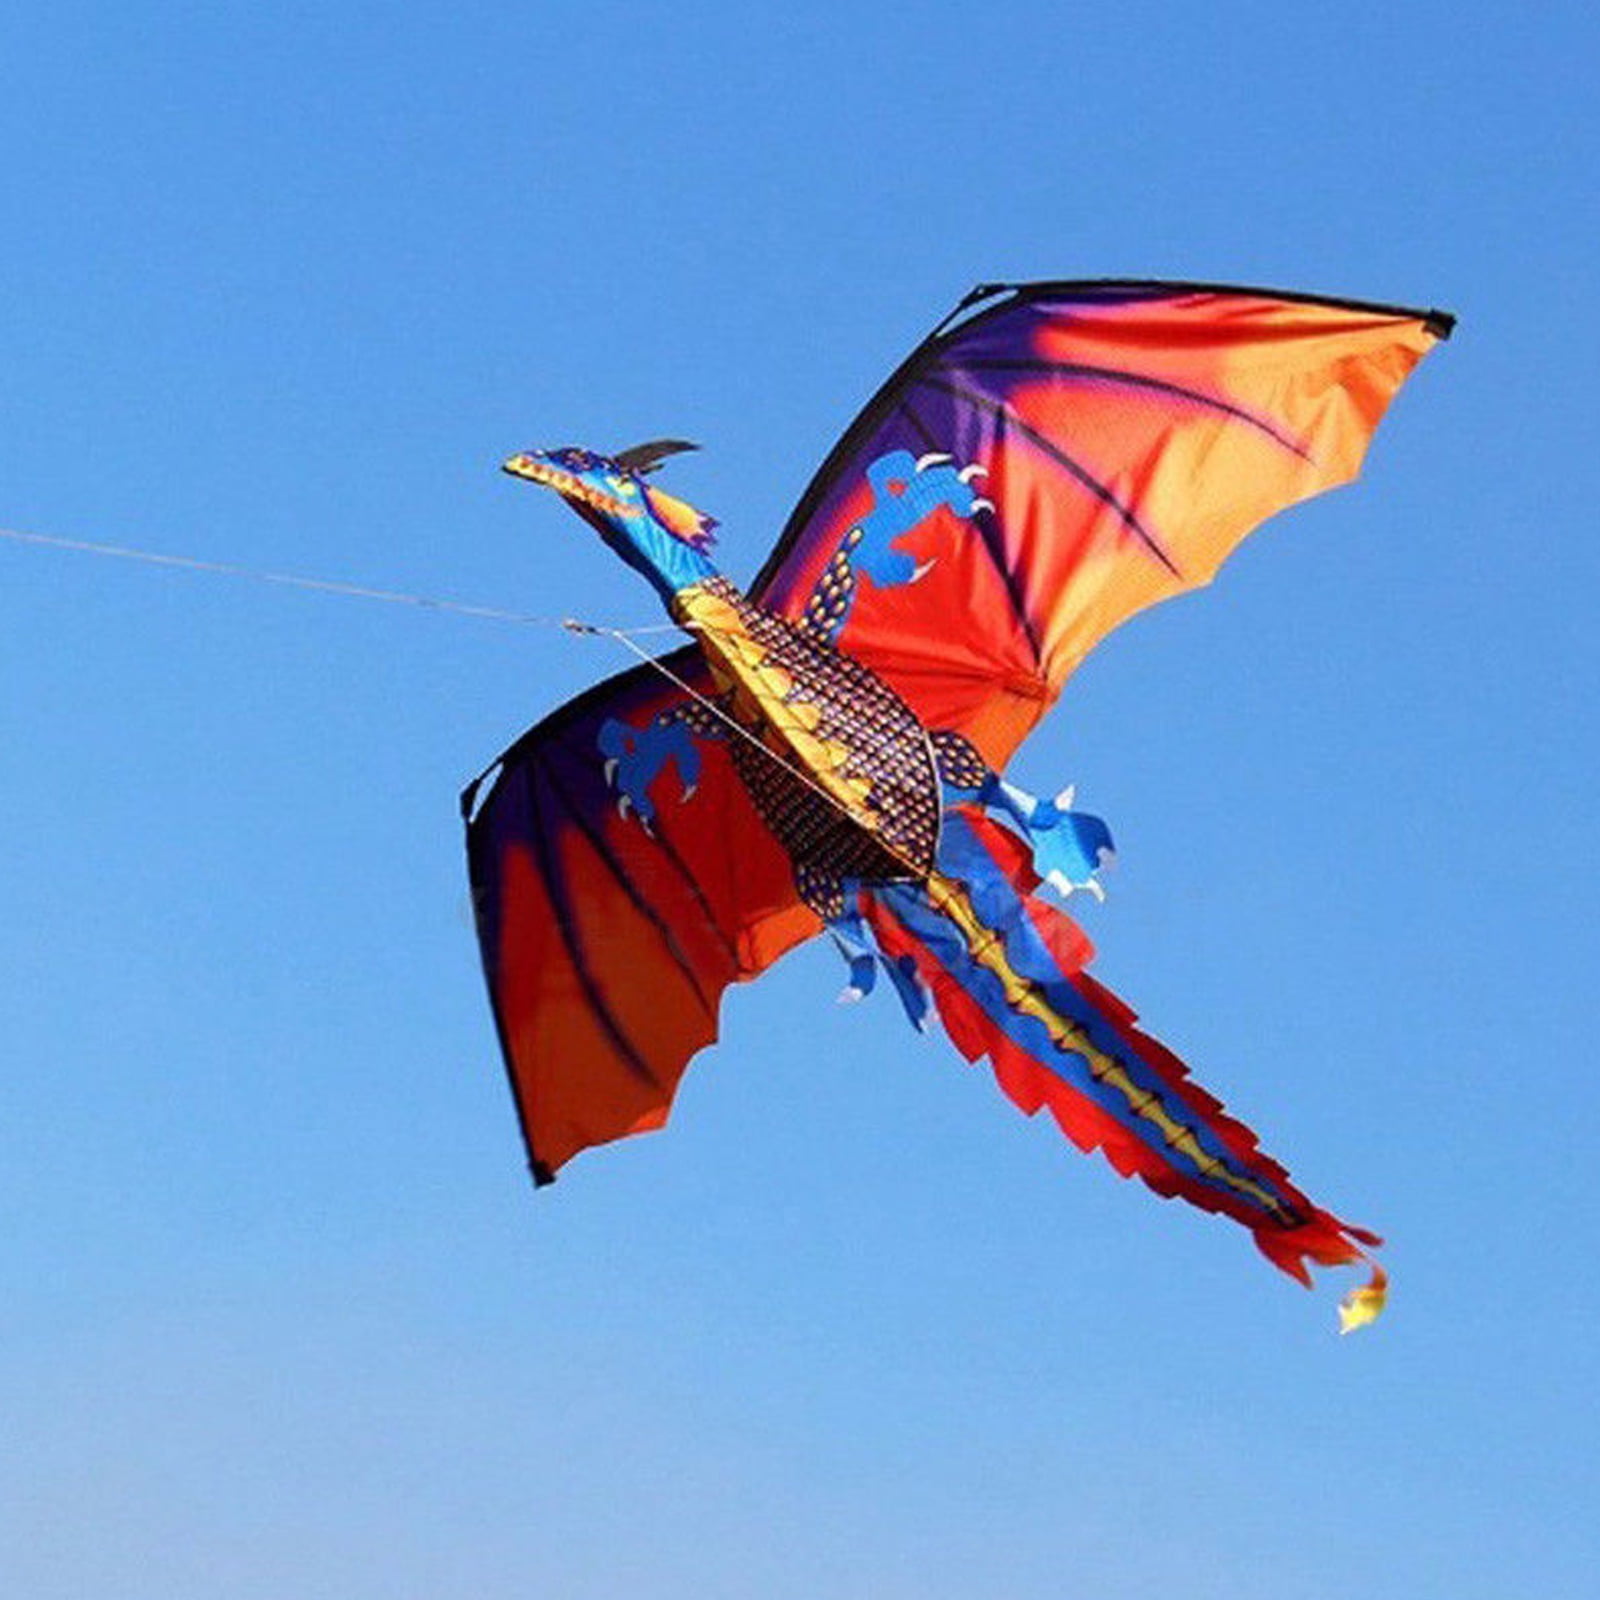 Details about   Beautiful Kite for Outdoor Games and Activities Single Line Kite with Flying Too 